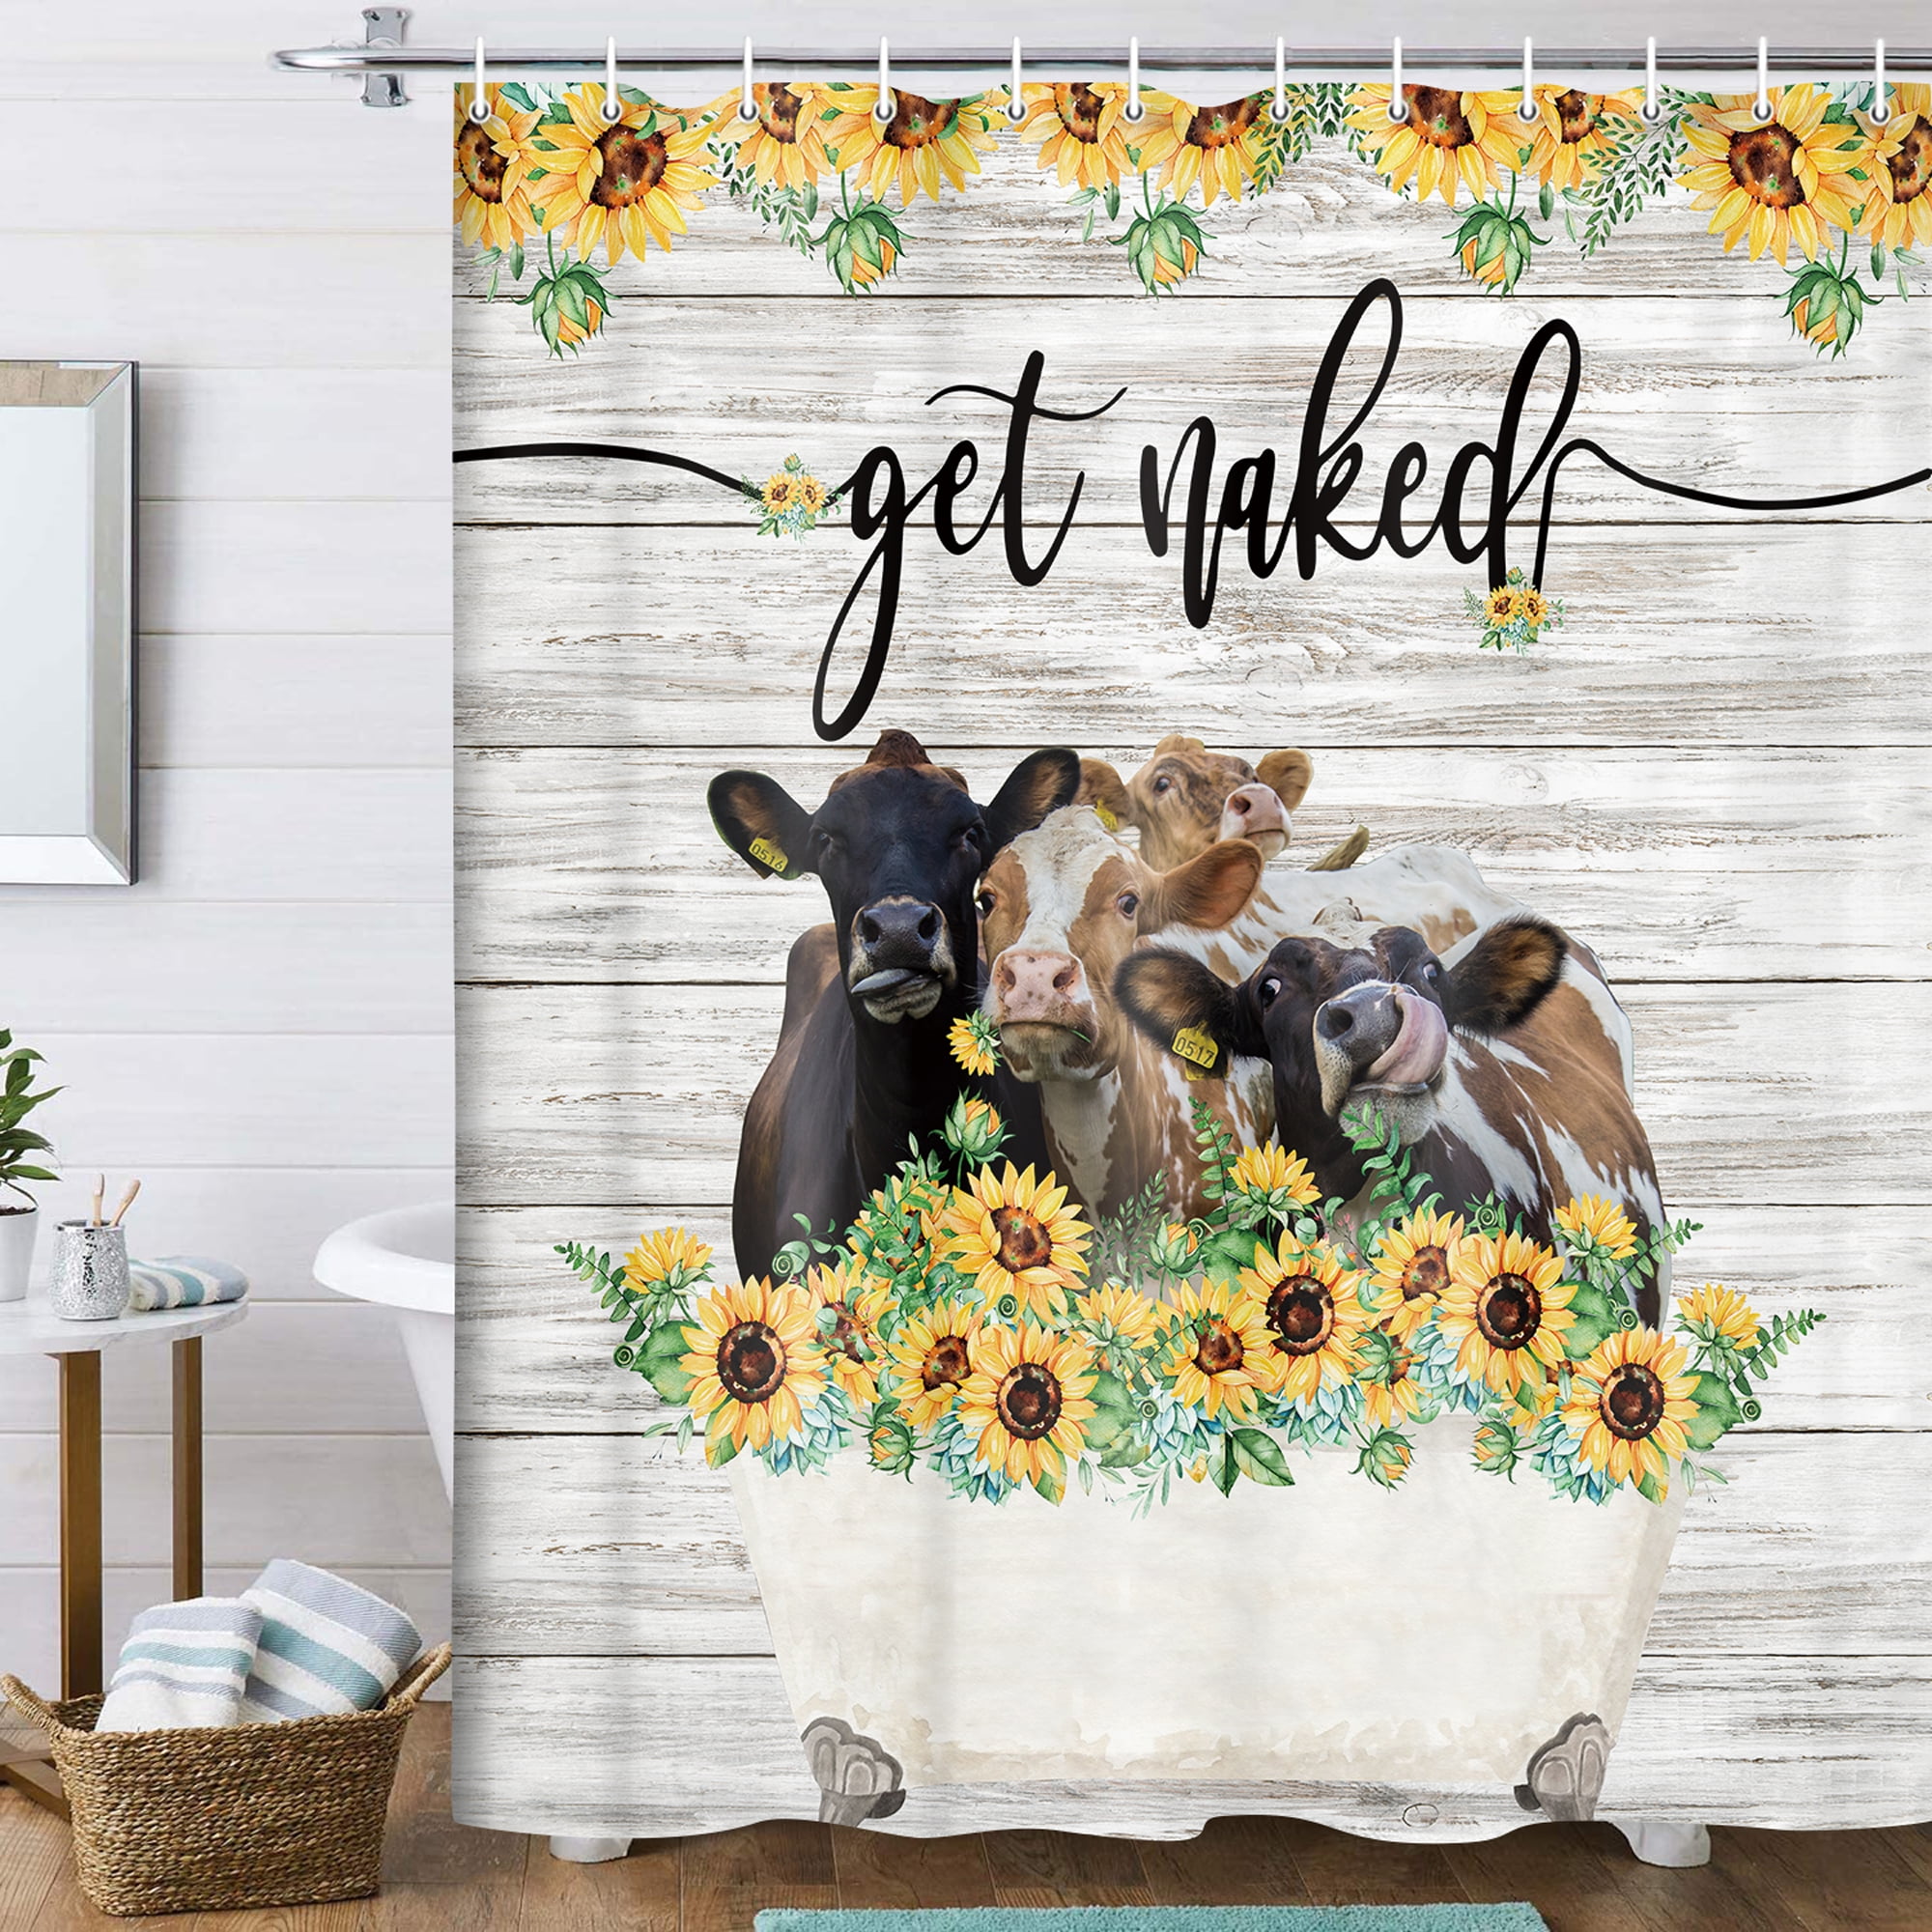 Details about   Funny Bathing Cow Sunflower Farmhouse Shower Curtain Get Naked Bathroom Decor 